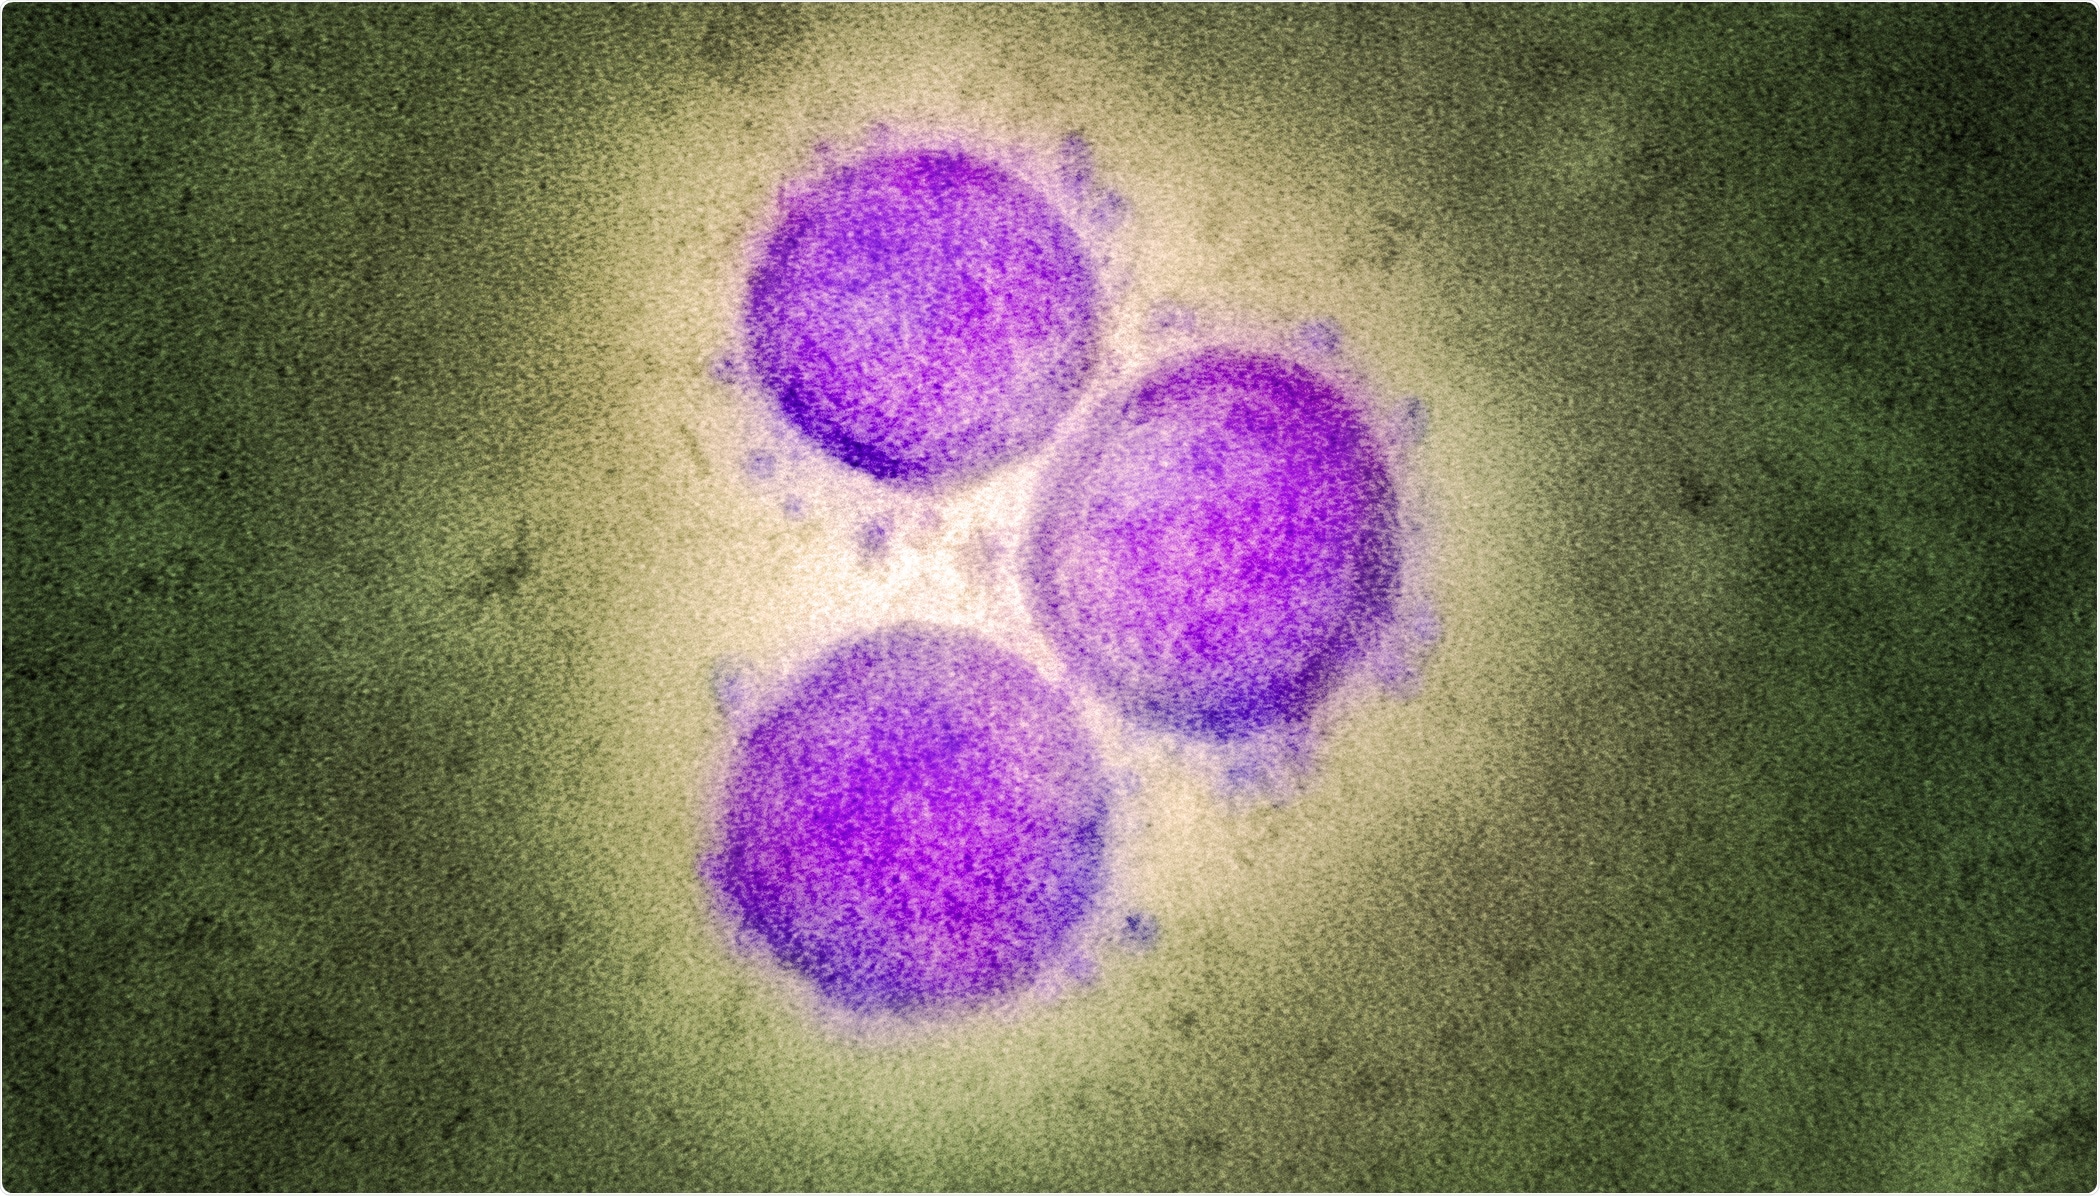 Study: Antibody-Dependent Enhancement of SARS-CoV-2 Infection Is Mediated by the IgG Receptors FcγRIIA and FcγRIIIA but Does Not Contribute to Aberrant Cytokine Production by Macrophages. Image Credit: NIAID